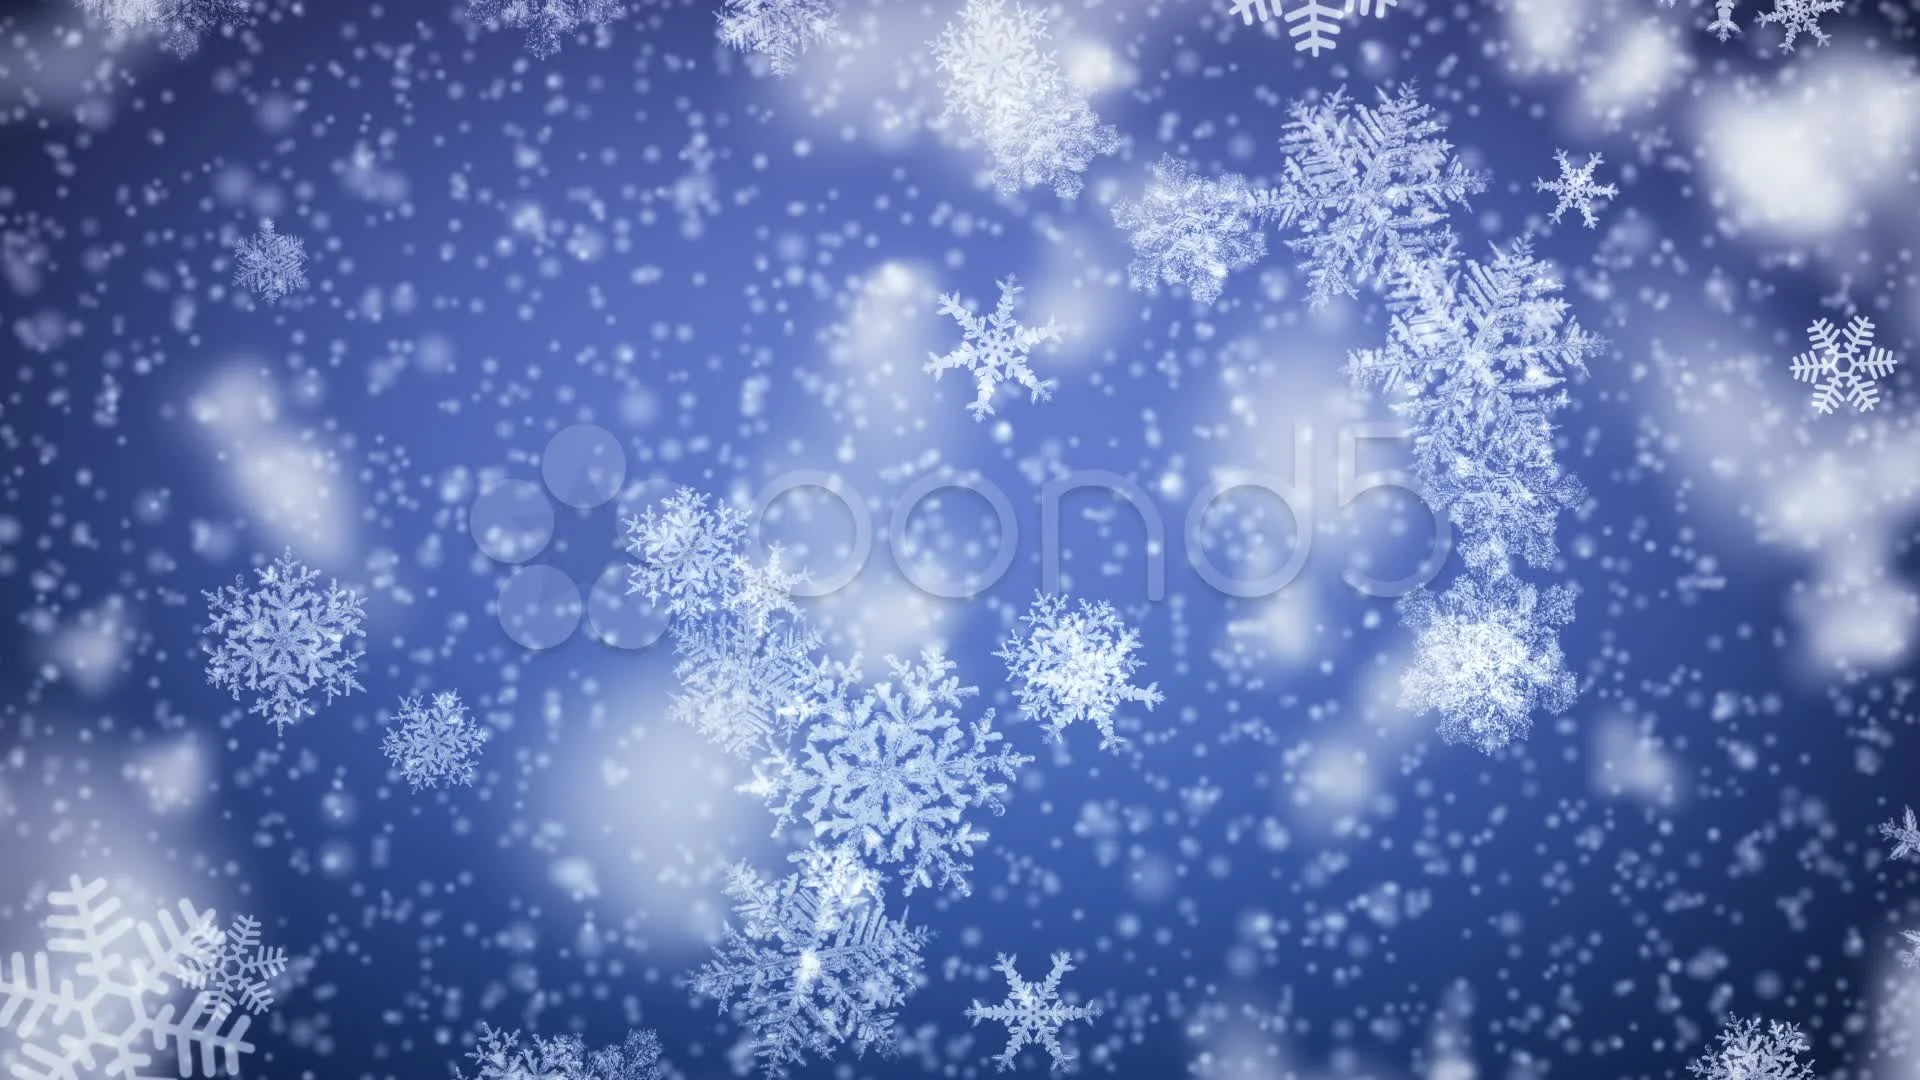 snowflakes falling background blue